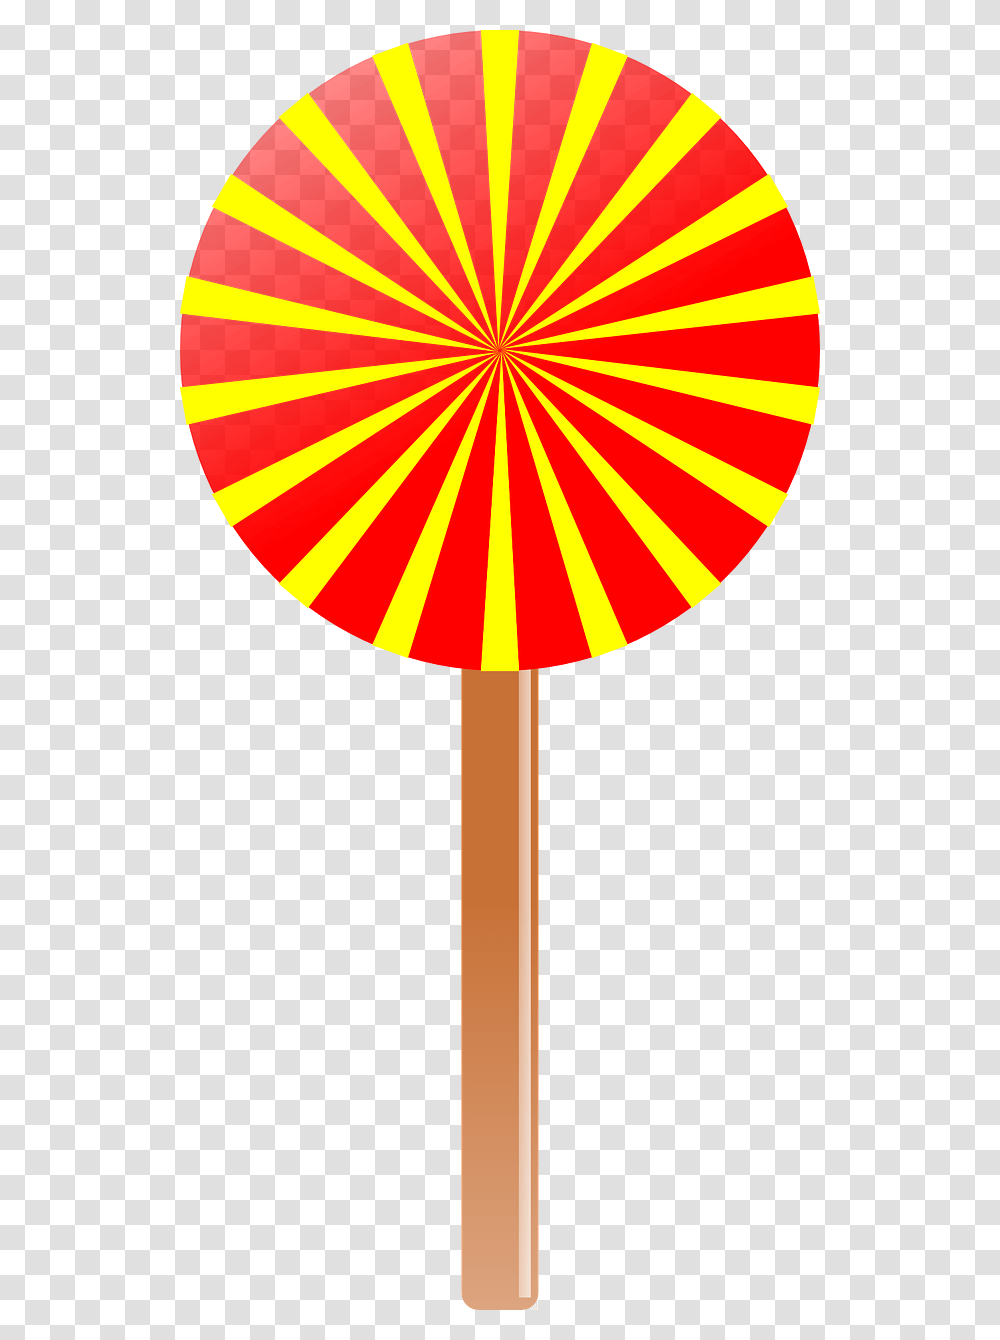 Lollipop Sweet Sugar Free Picture Sun Rays Vector, Lamp, Sweets, Food, Confectionery Transparent Png